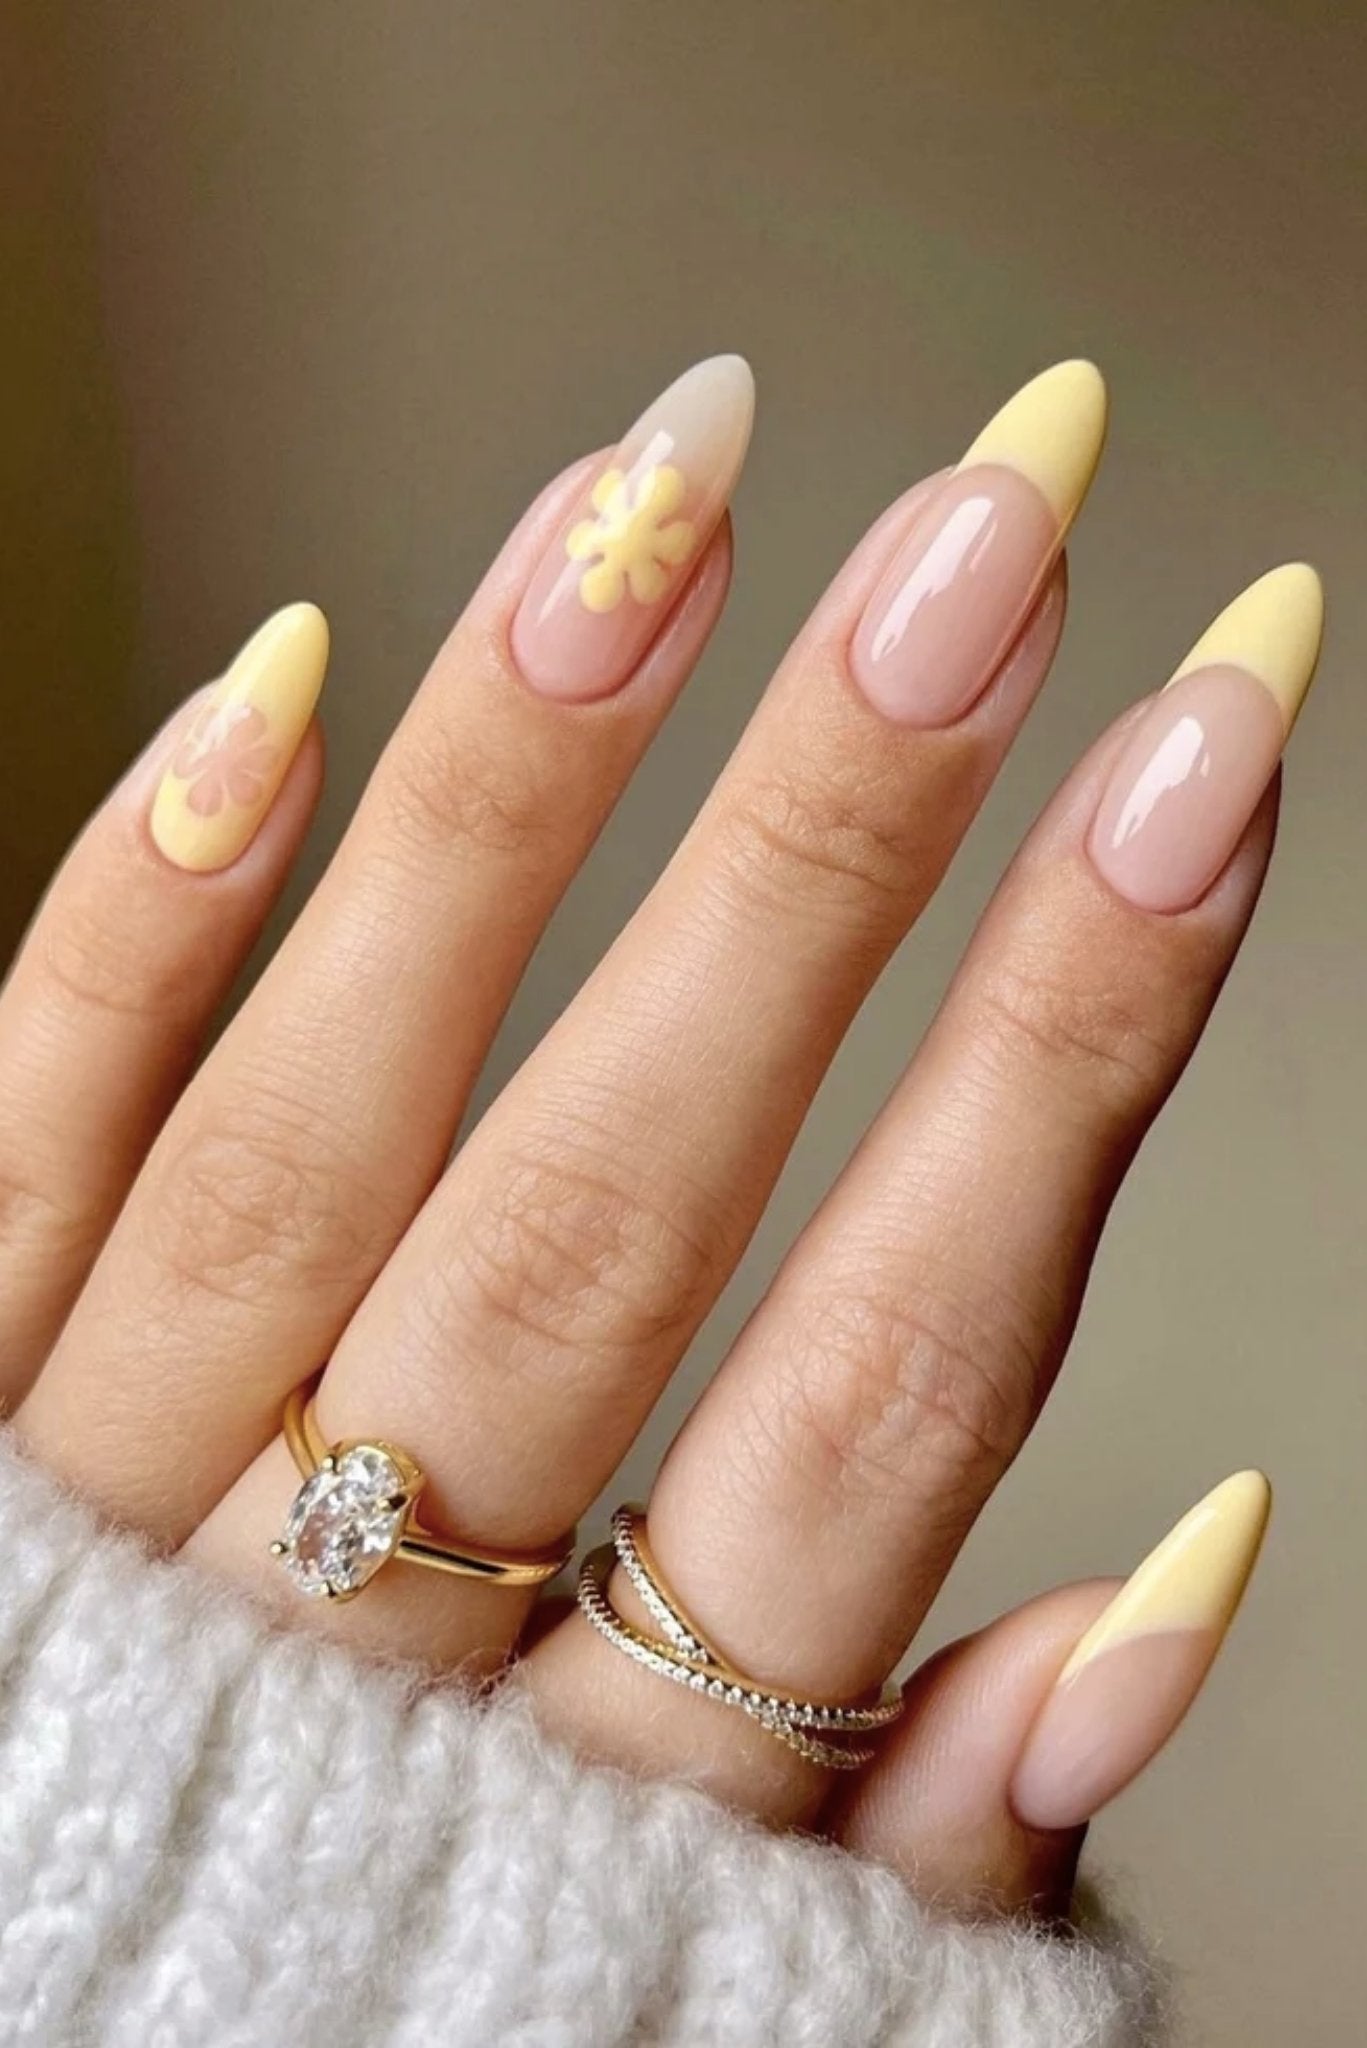 Nails for the Summer - Pretty Collected